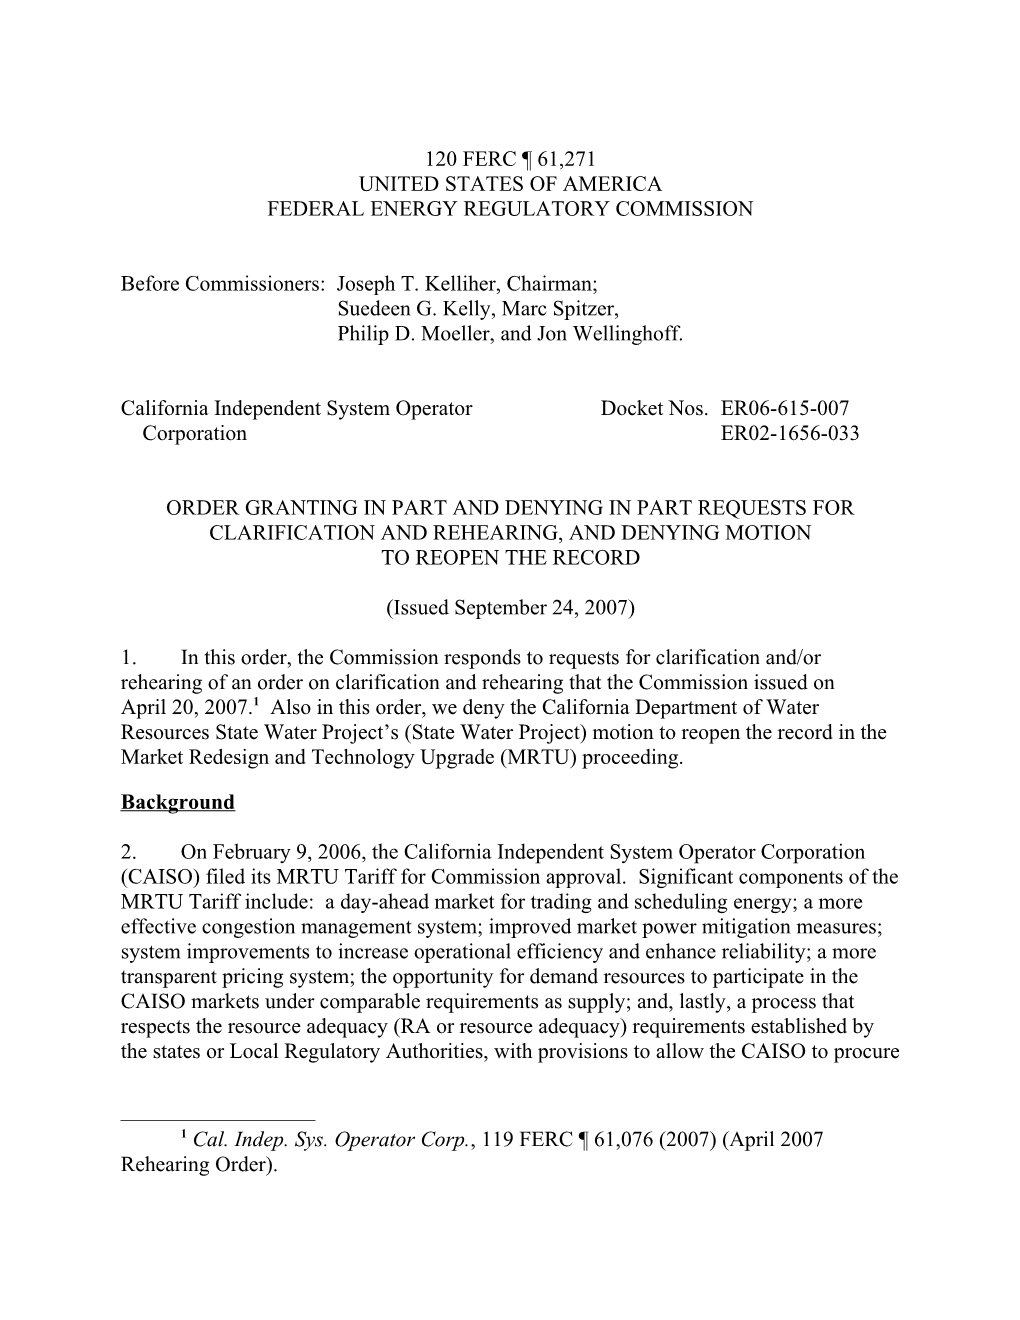 September 24, 2007 FERC Order Granting in Part and Denying in Part Requests for Clarification